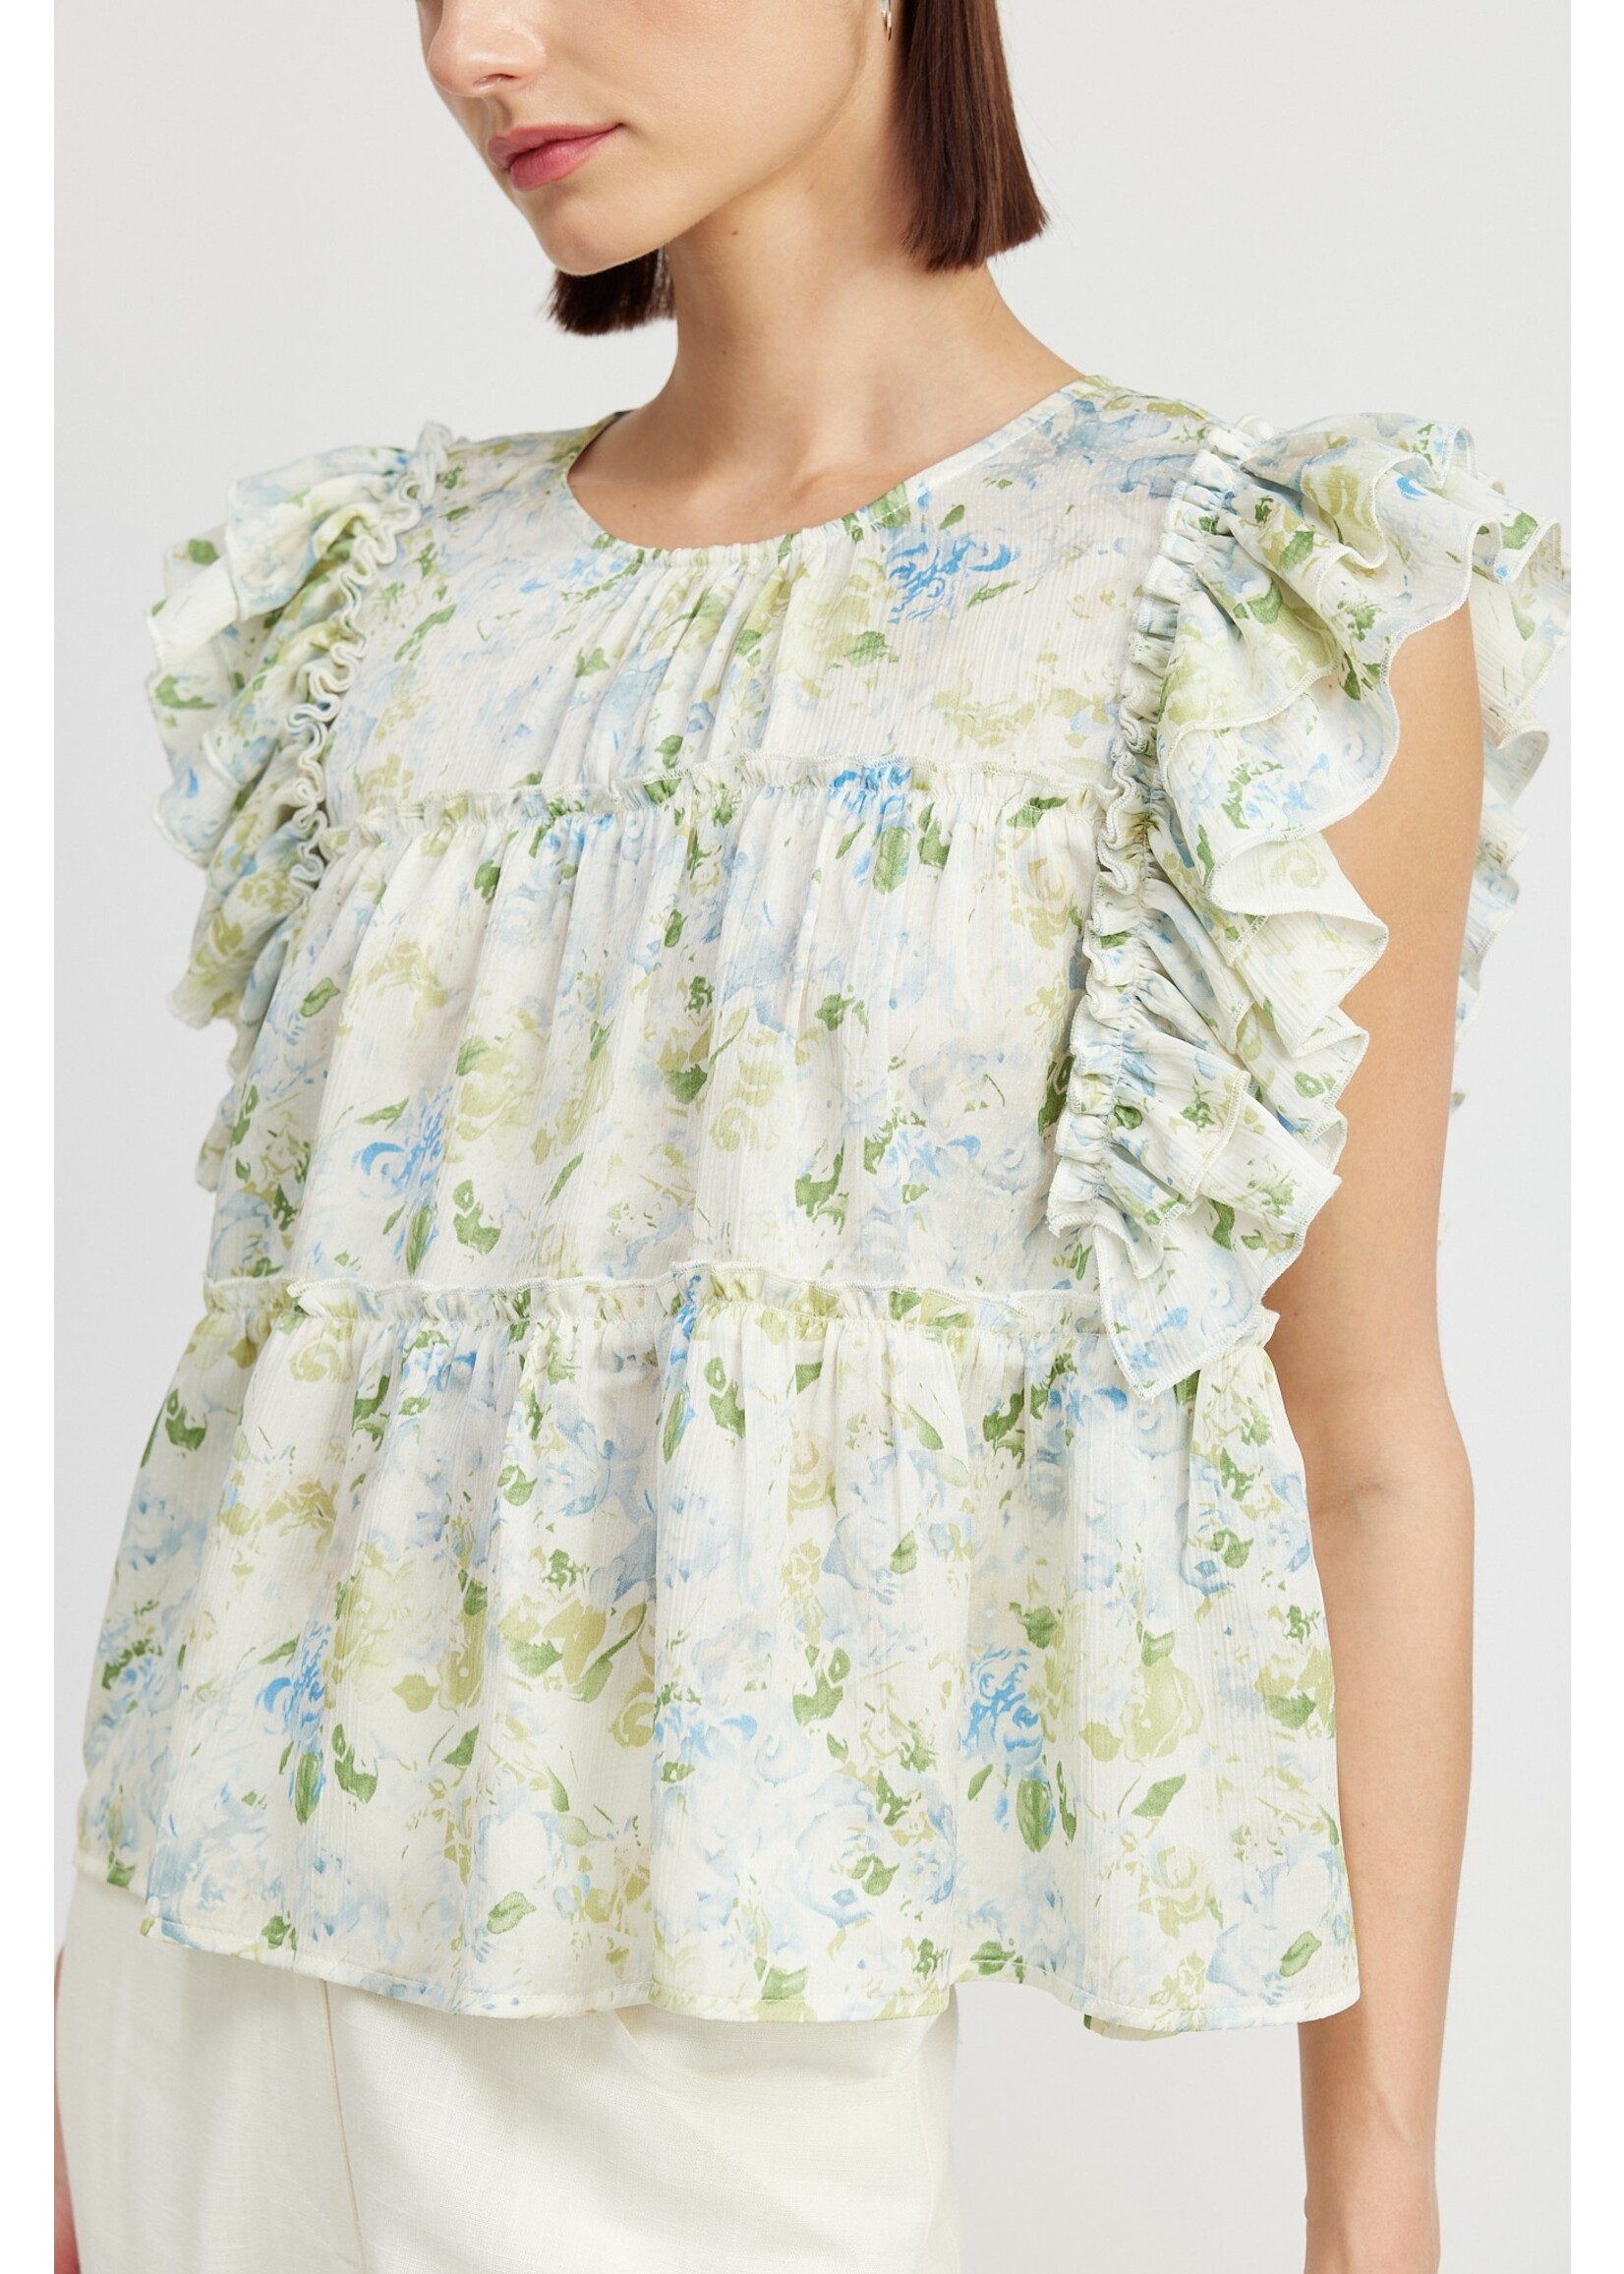 jacquie the label Floral Printed Ruffle Blouse - ISK2224T